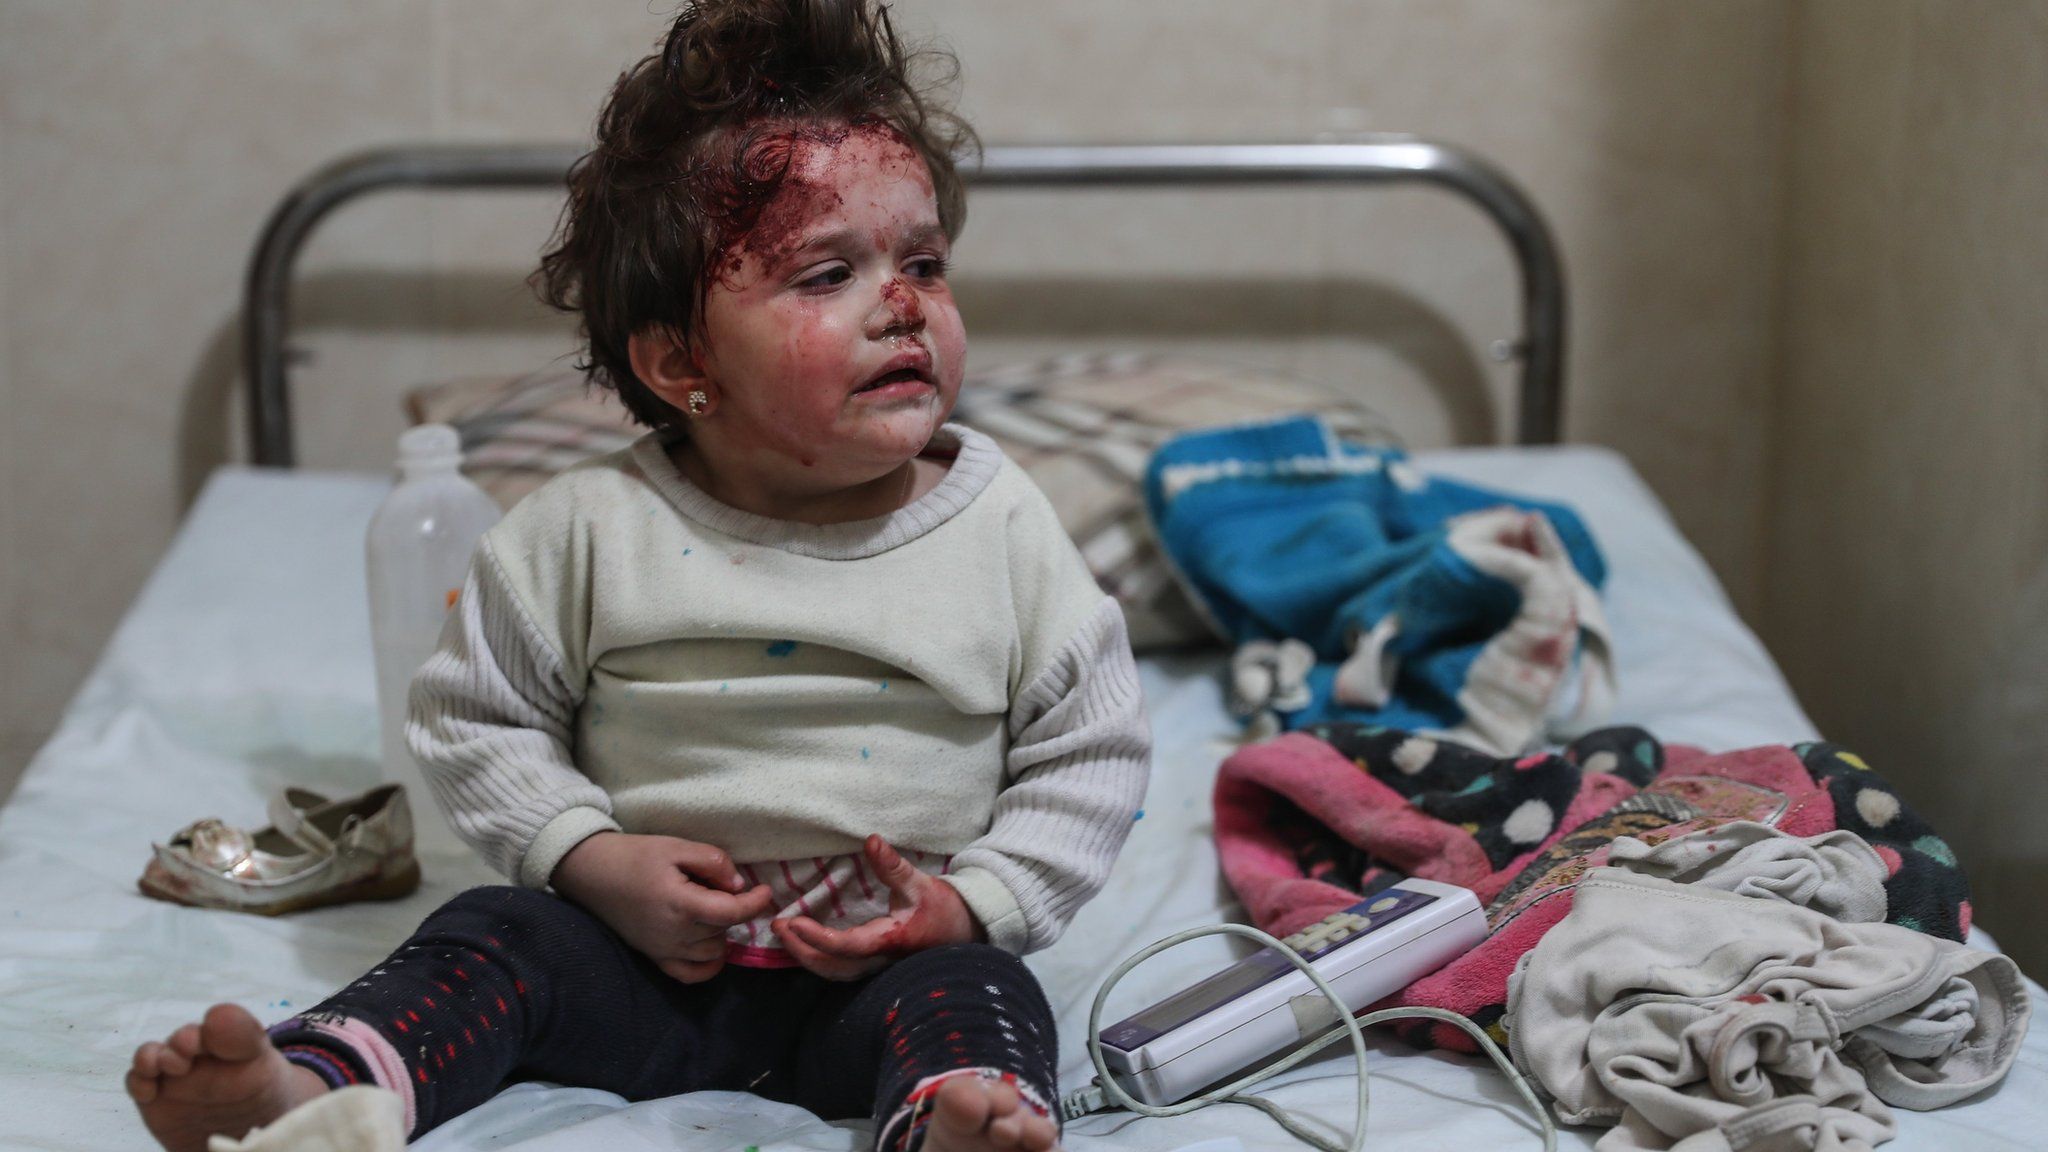 A young girl is treated at a hospital after a bombing in Mesraba, Eastern Ghouta, Syria, 3 January 2018